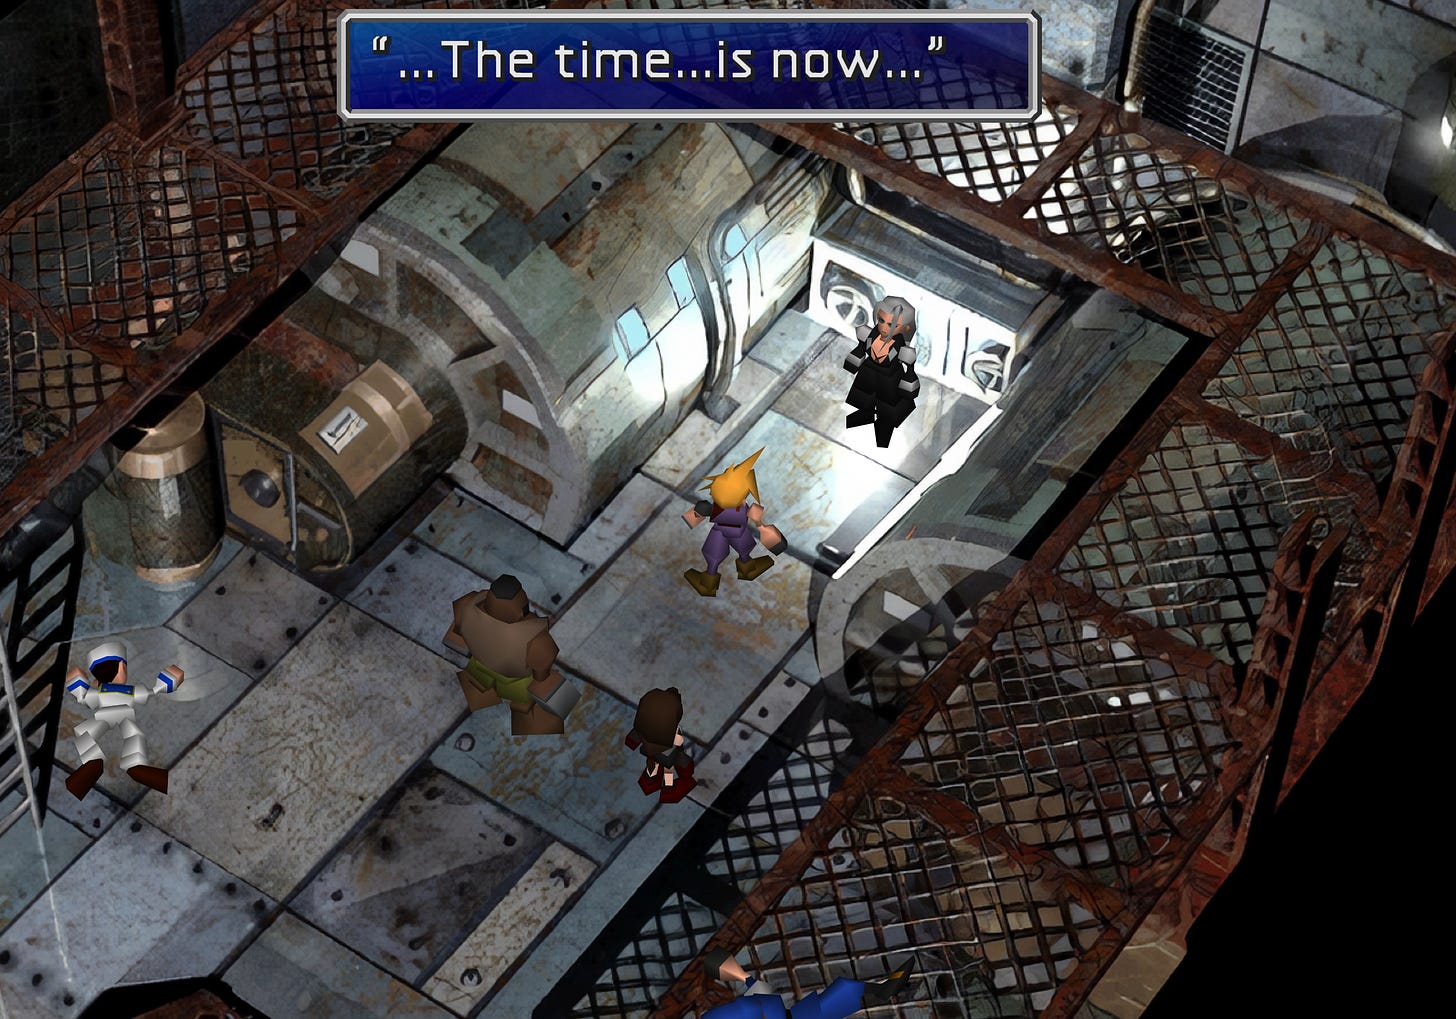 "...the time...is now..." — The party meets Sephiroth in the Shinra cargo ship's engine room.